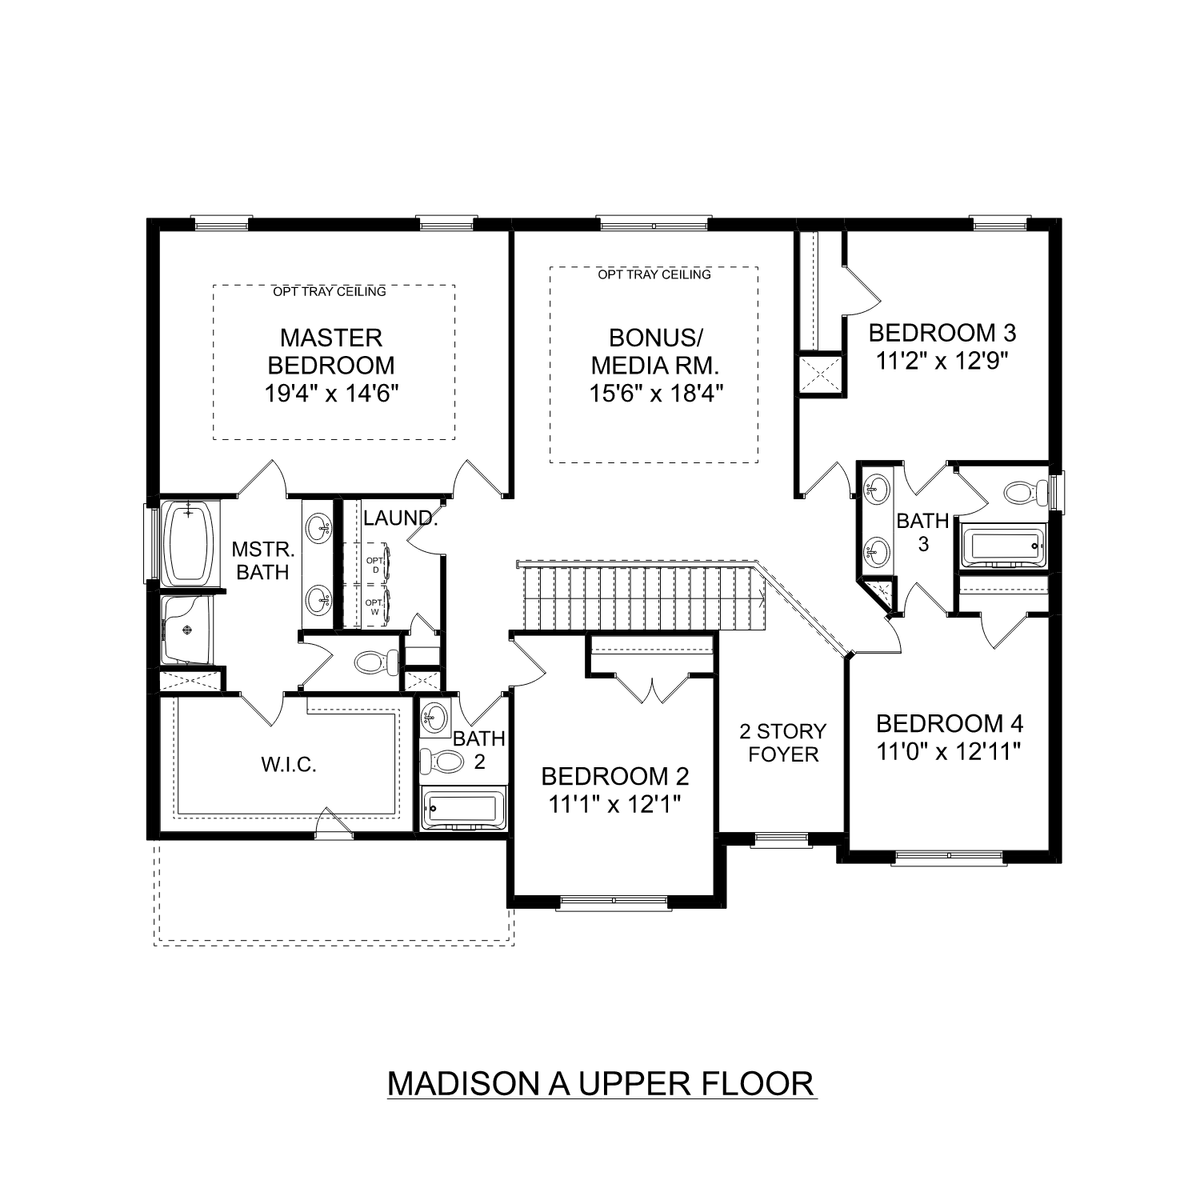 2 - The Madison A floor plan layout for 114 Scout Drive in Davidson Homes' Barnett's Crossing community.